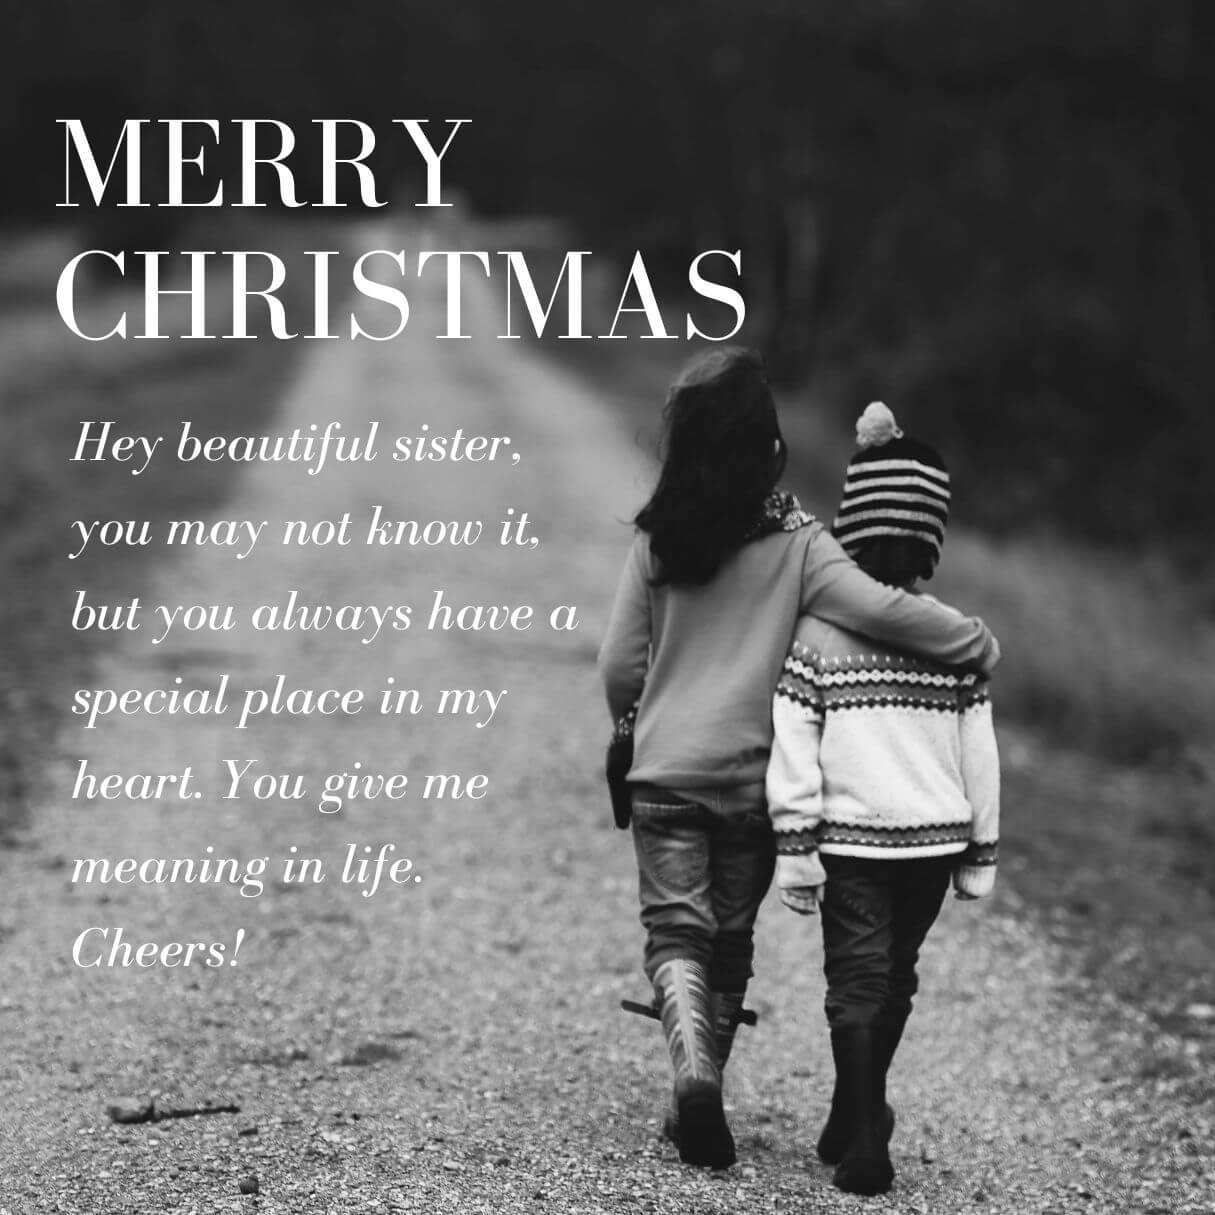 Merry Christmas Wishes For My Sister